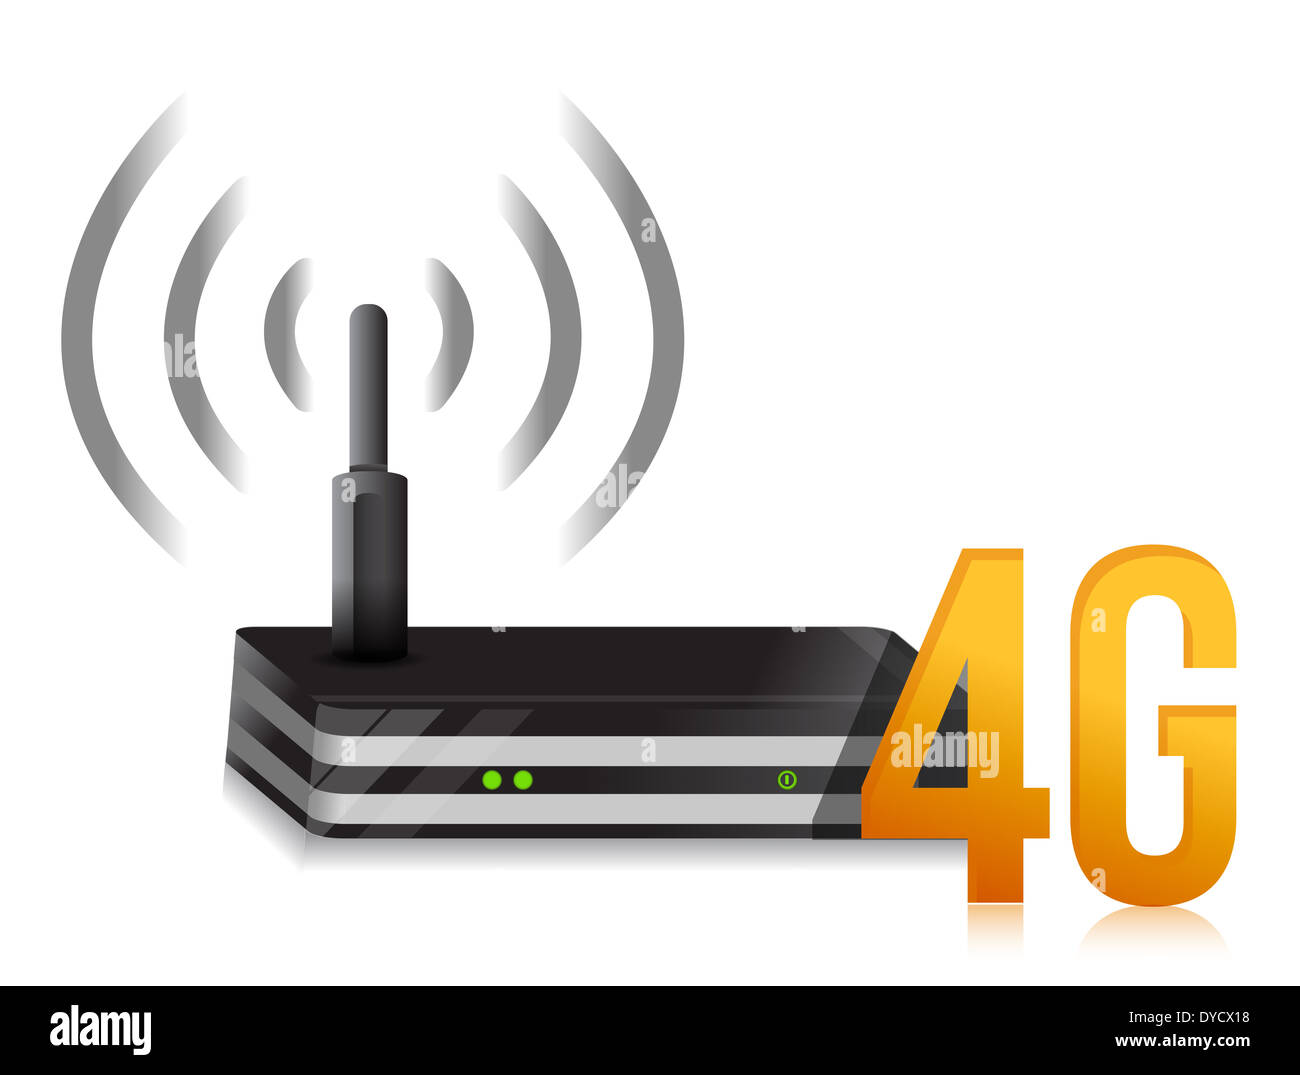 4G symbol with internet router illustration design over white Stock Photo -  Alamy